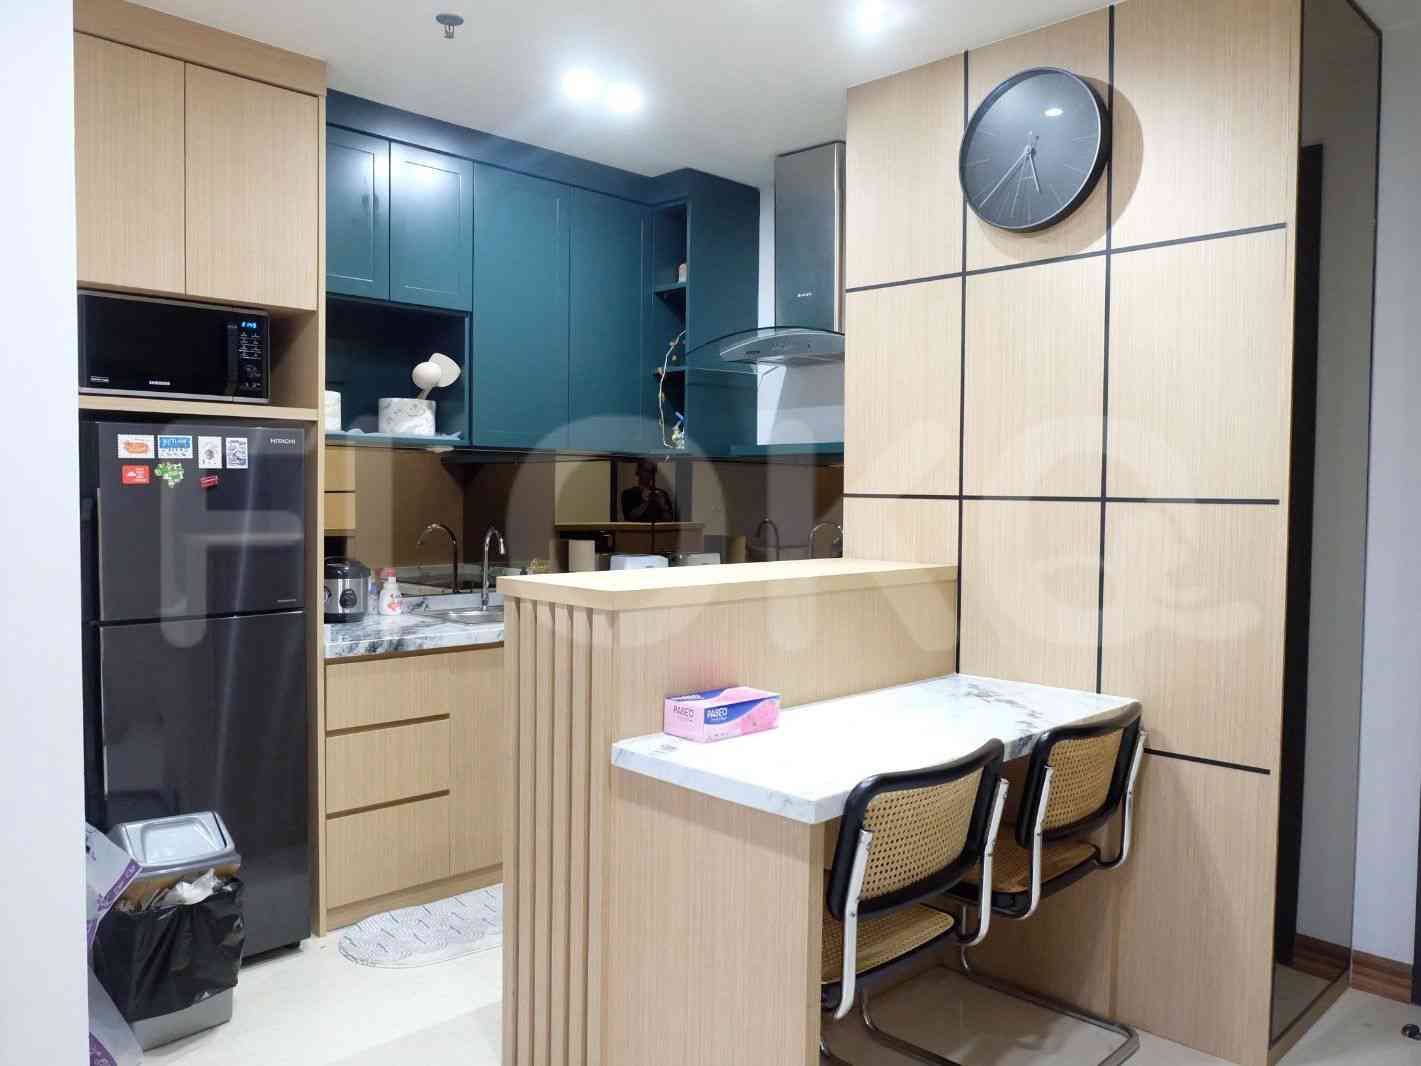 2 Bedroom on 19th Floor for Rent in Sudirman Hill Residences - ftaf55 2